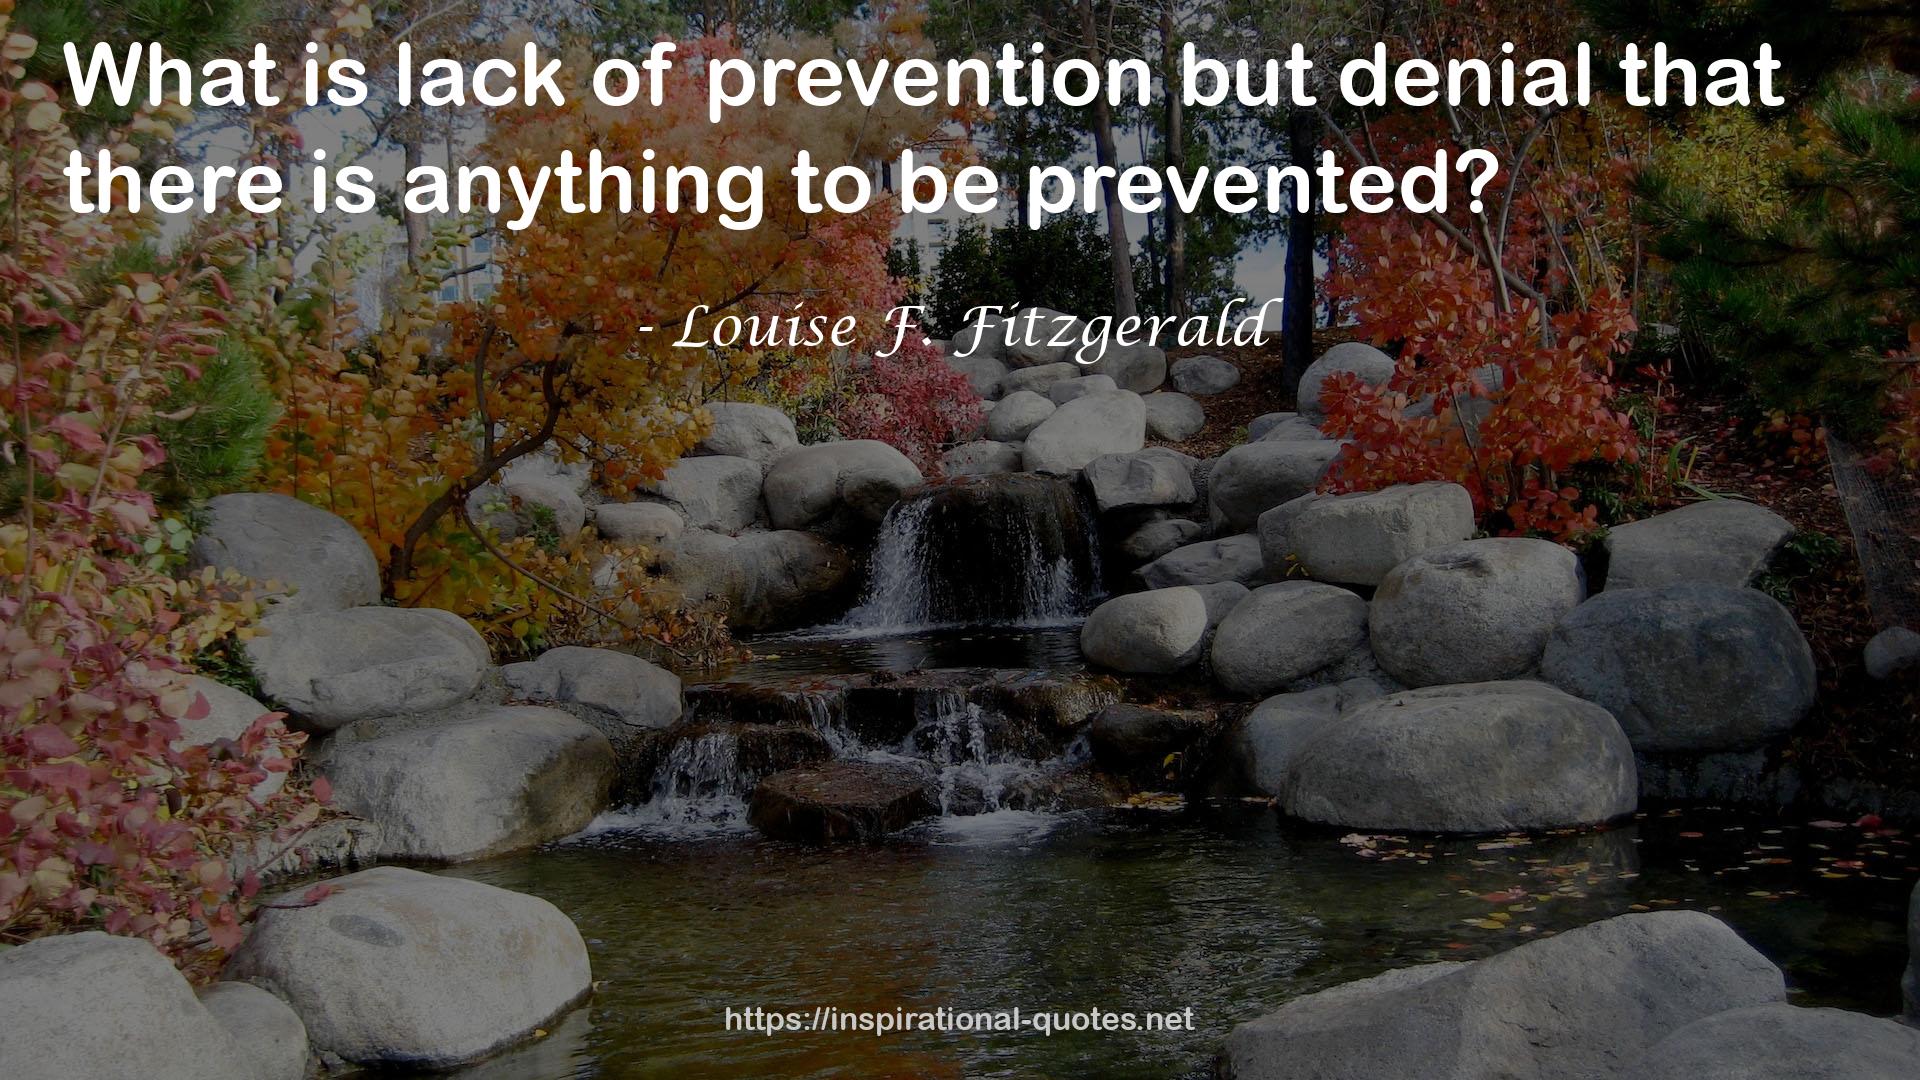 Louise F. Fitzgerald QUOTES